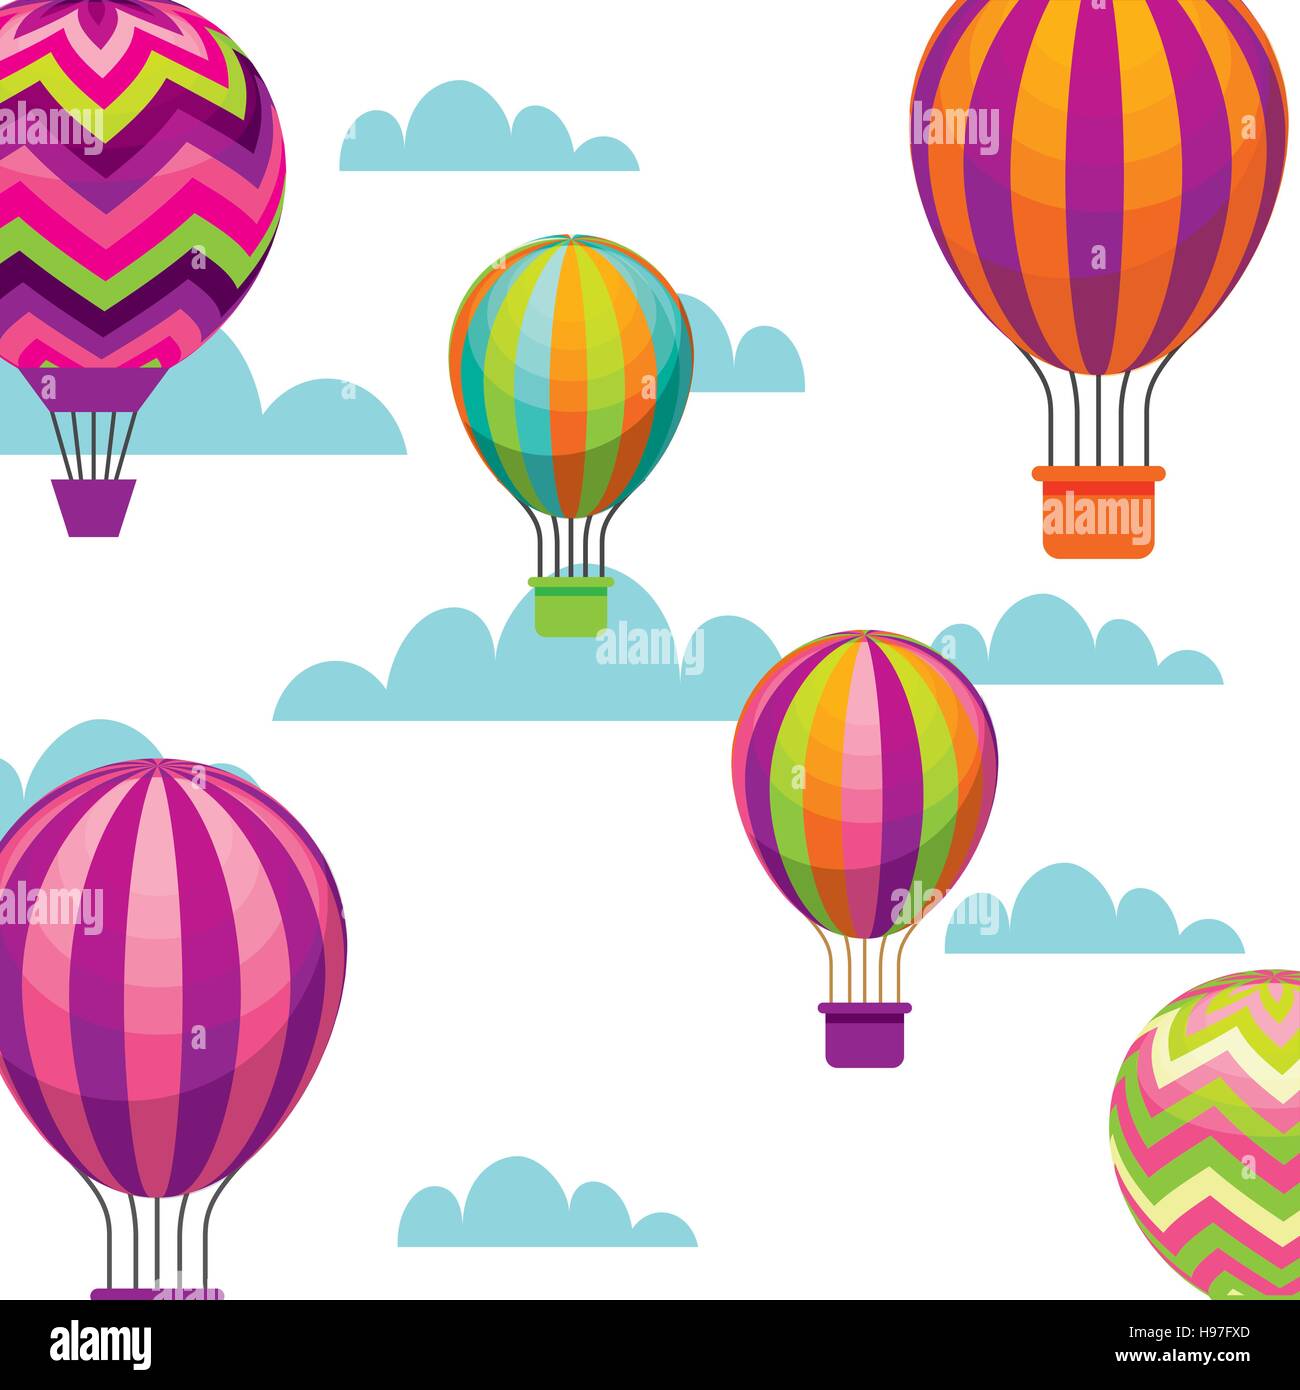 air balloons flying icons over sky background. colorful design. vector illustration Stock Vector